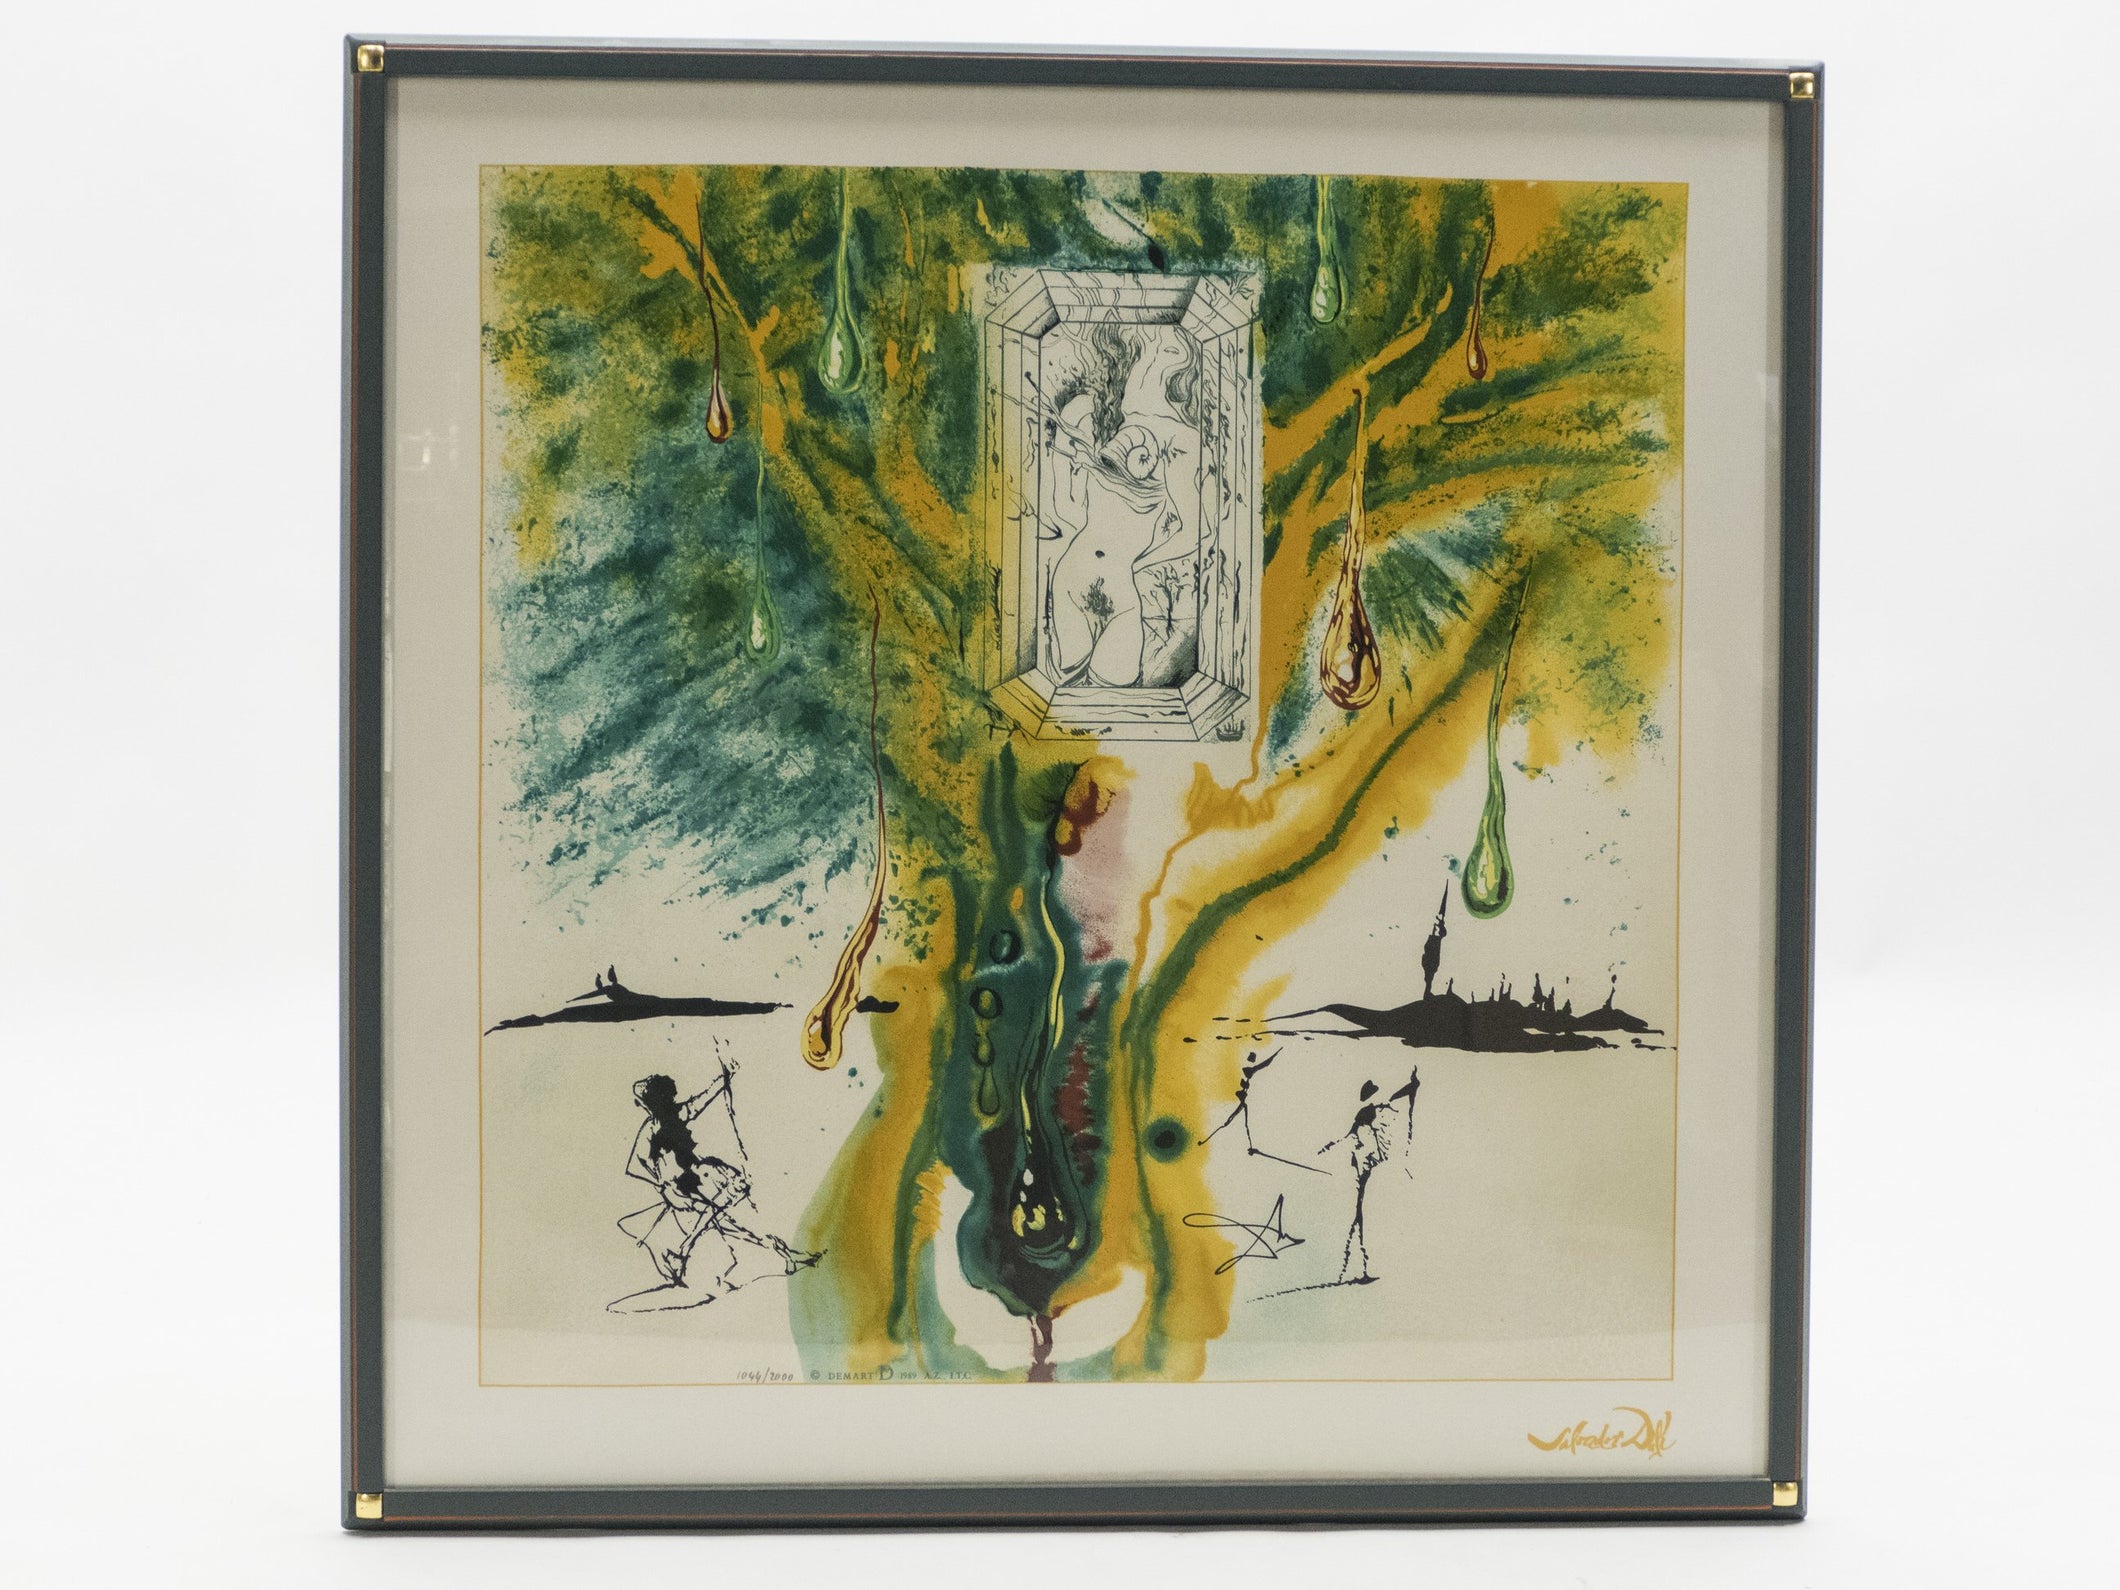 The Emerald Of The Tablet Salvador Dali Silk Serigraphy 1989 - edition of 2000